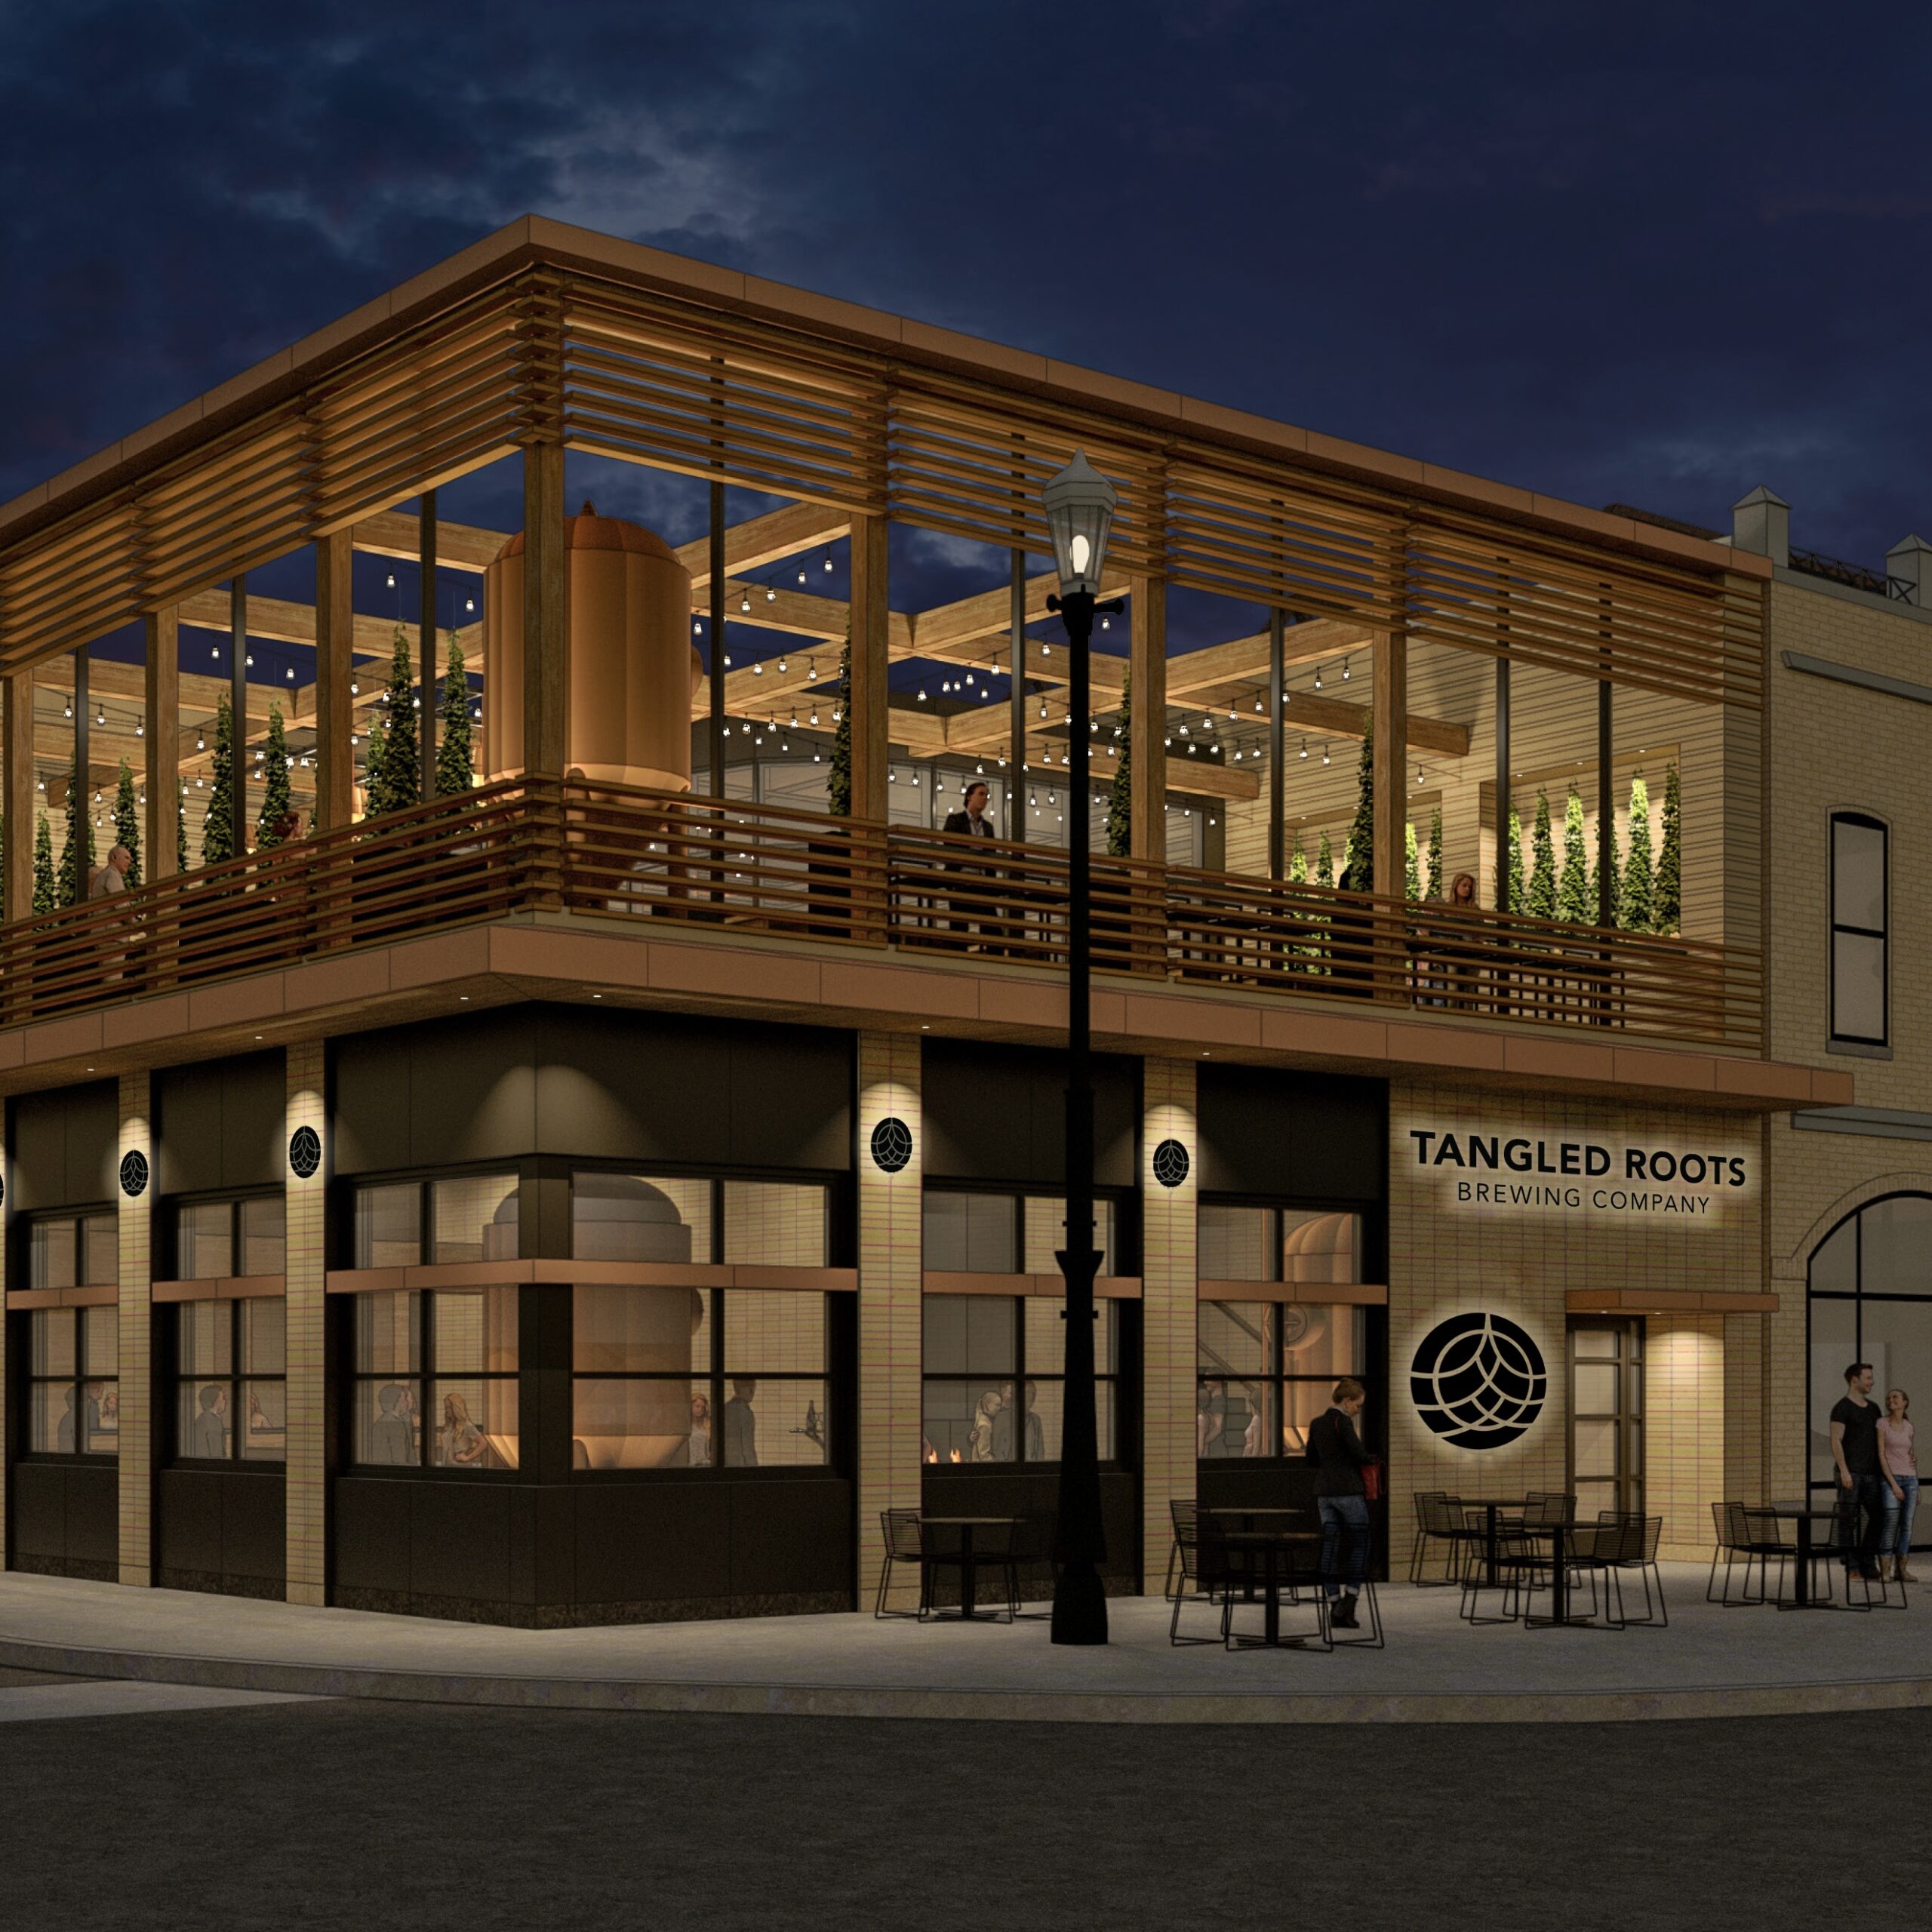 The exterior of a two story brick brew pub with outdoor dining in a beer garden on the second floor.